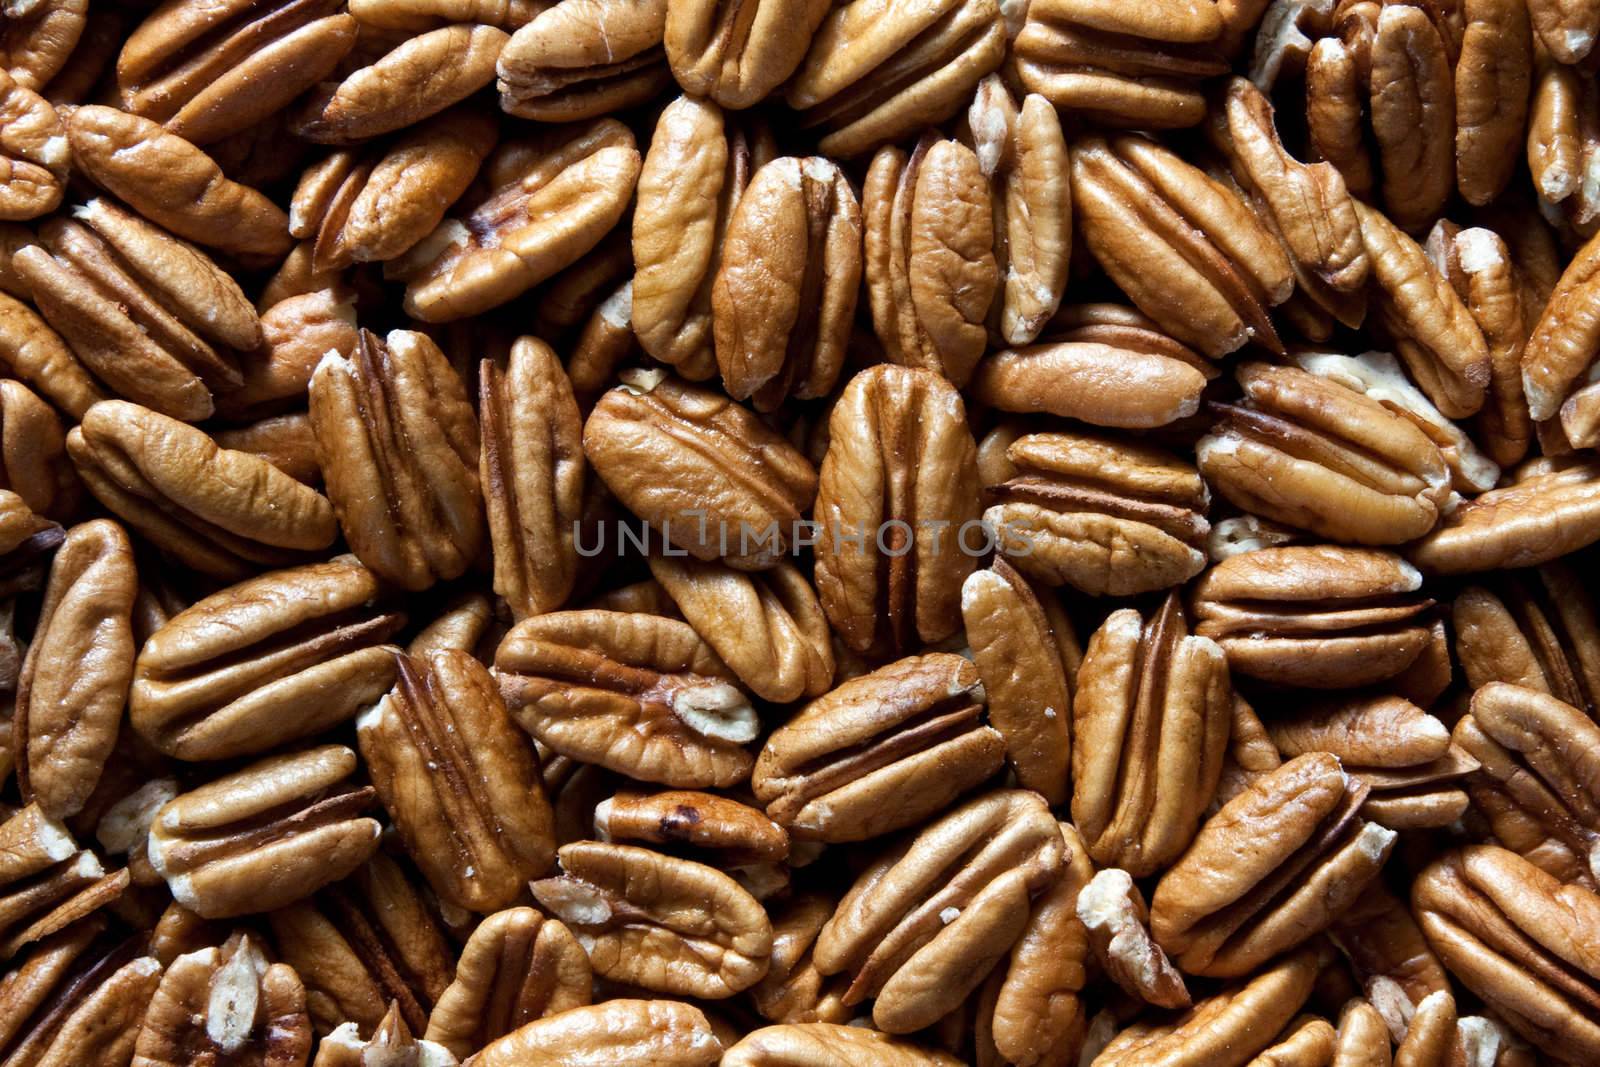 Raw, dried, and shelled pecan nuts